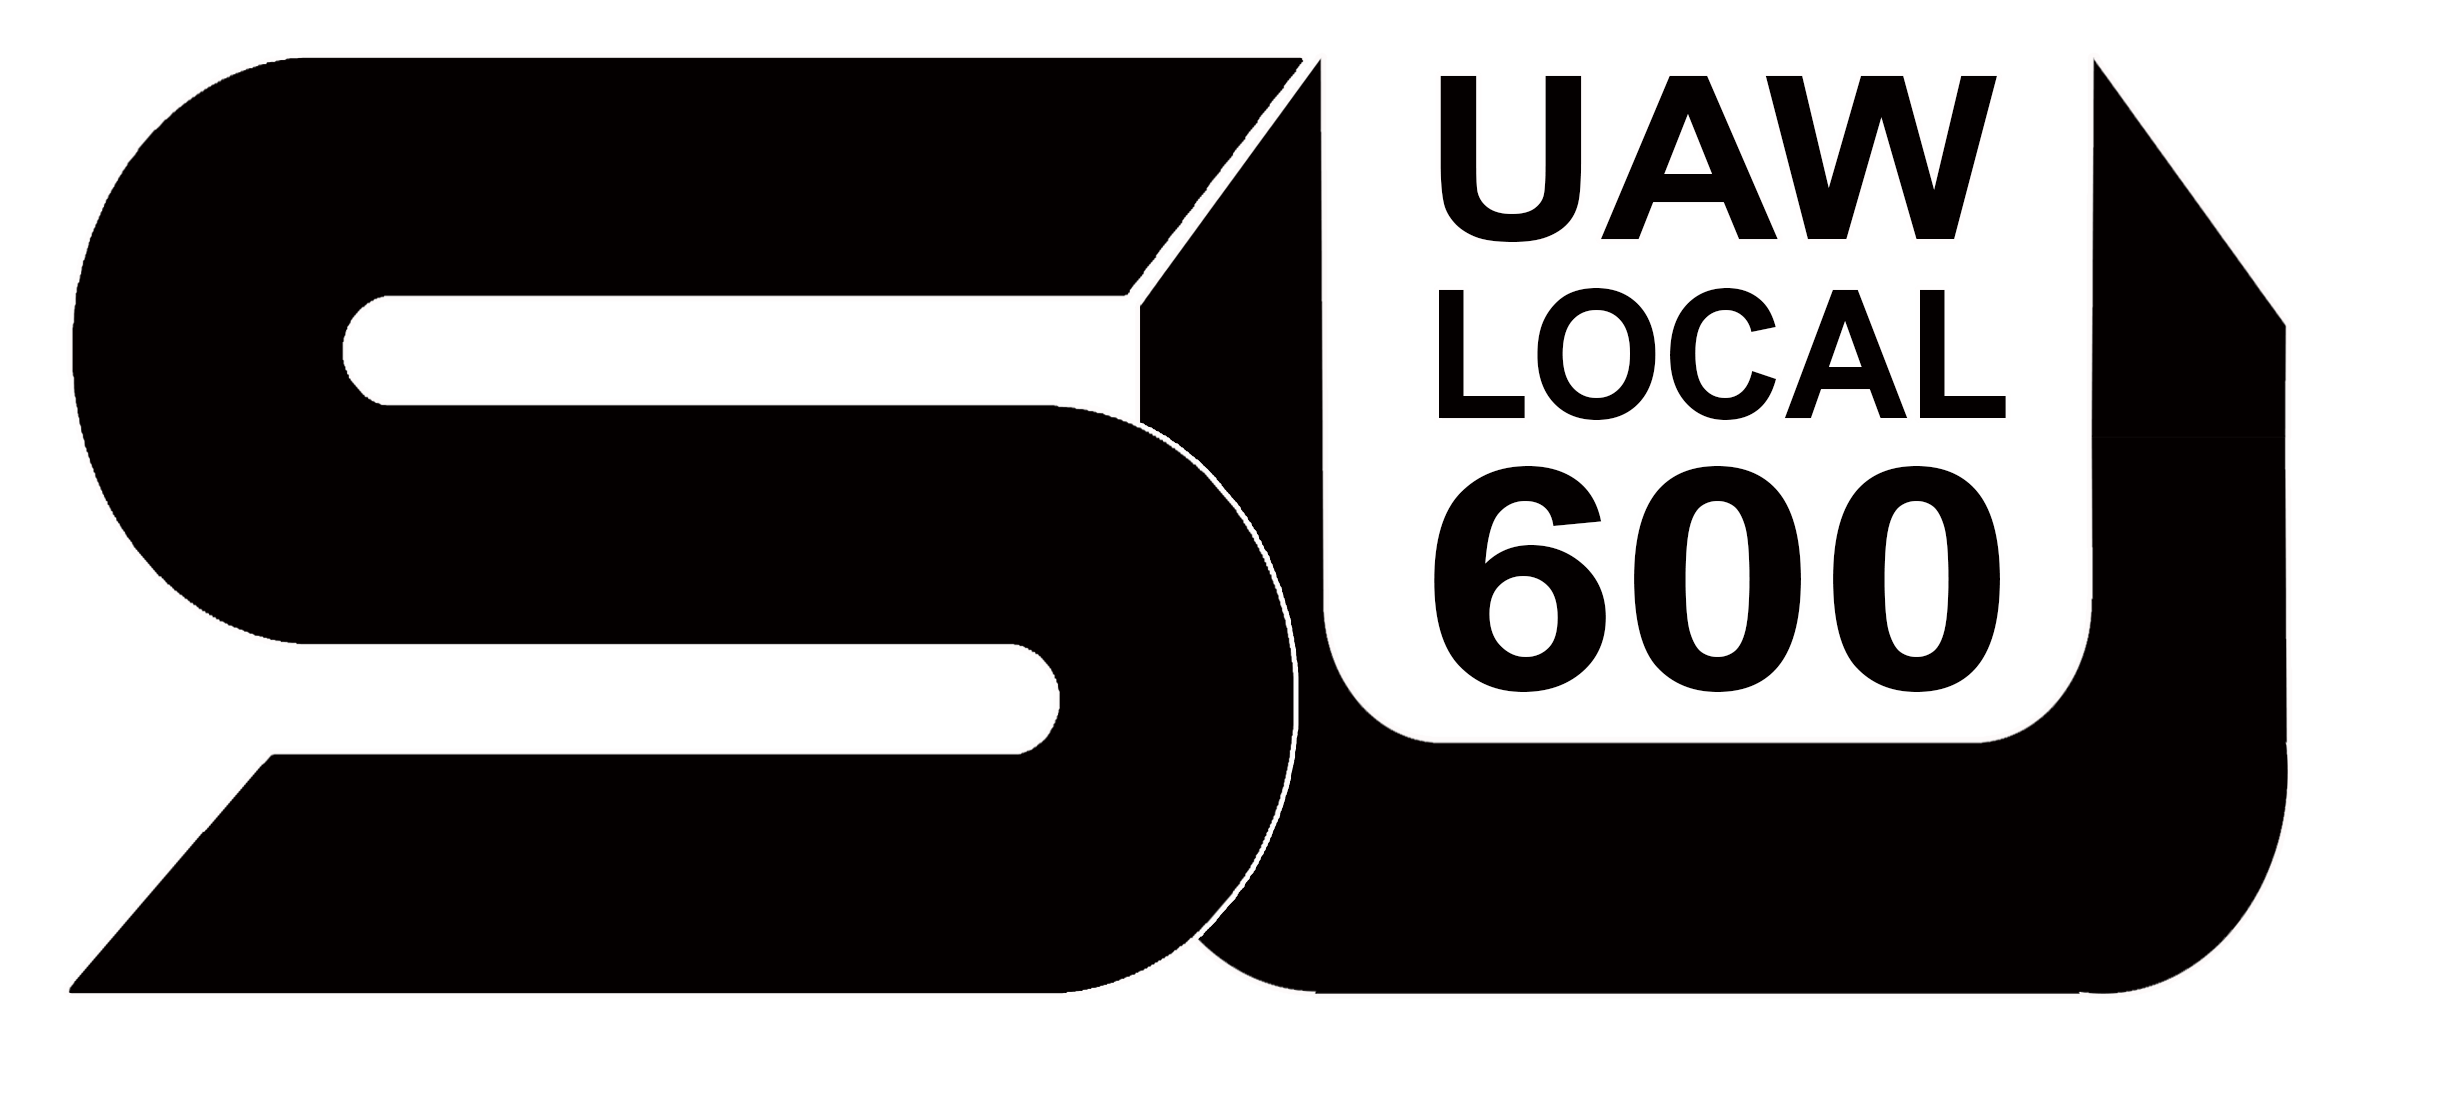 Local 600 UAW Logo - Member's Resources